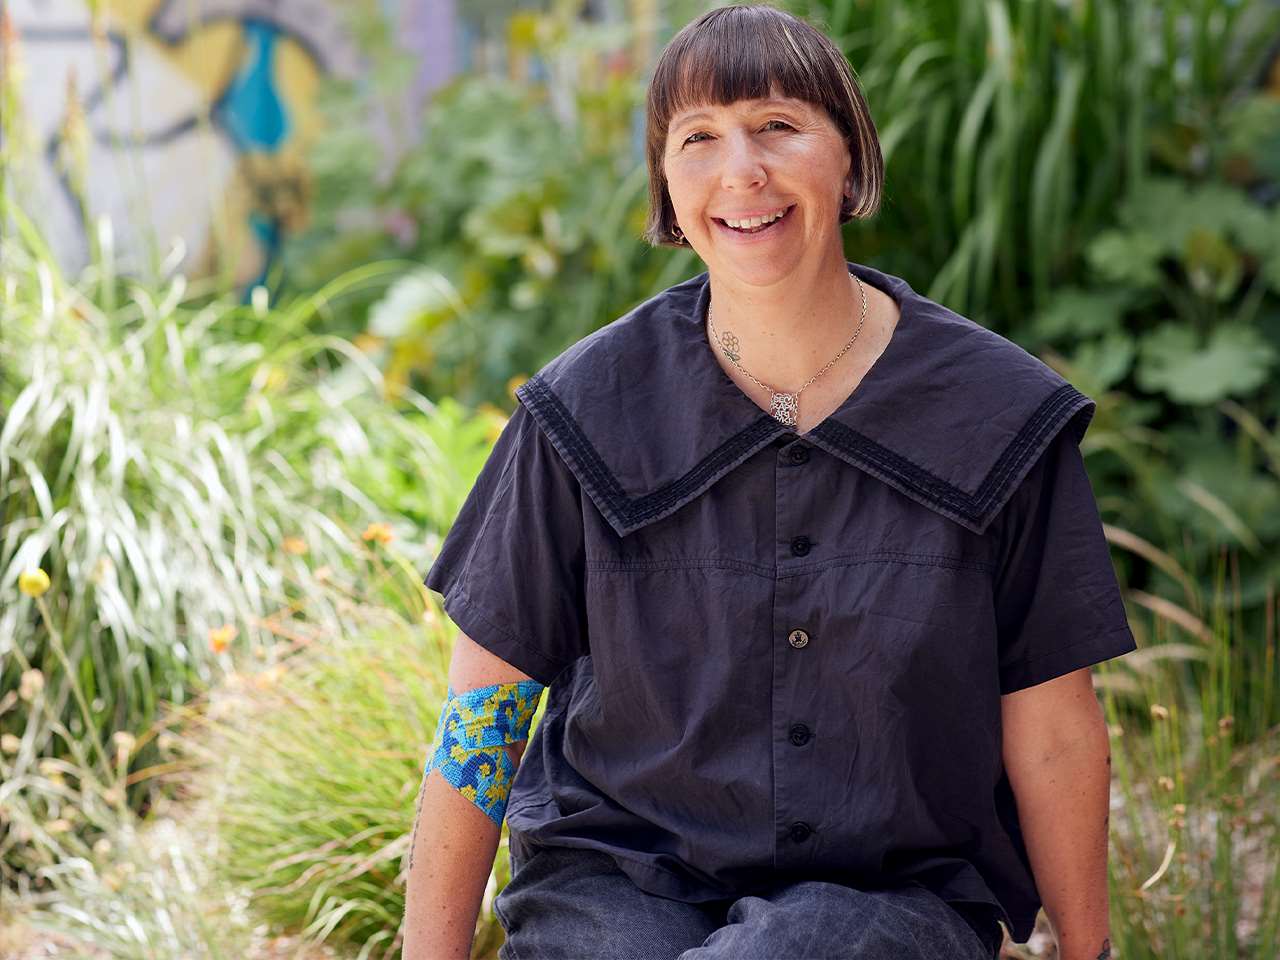 photo of artist Beci Orpin sitting in a green garden and smiling at the camera